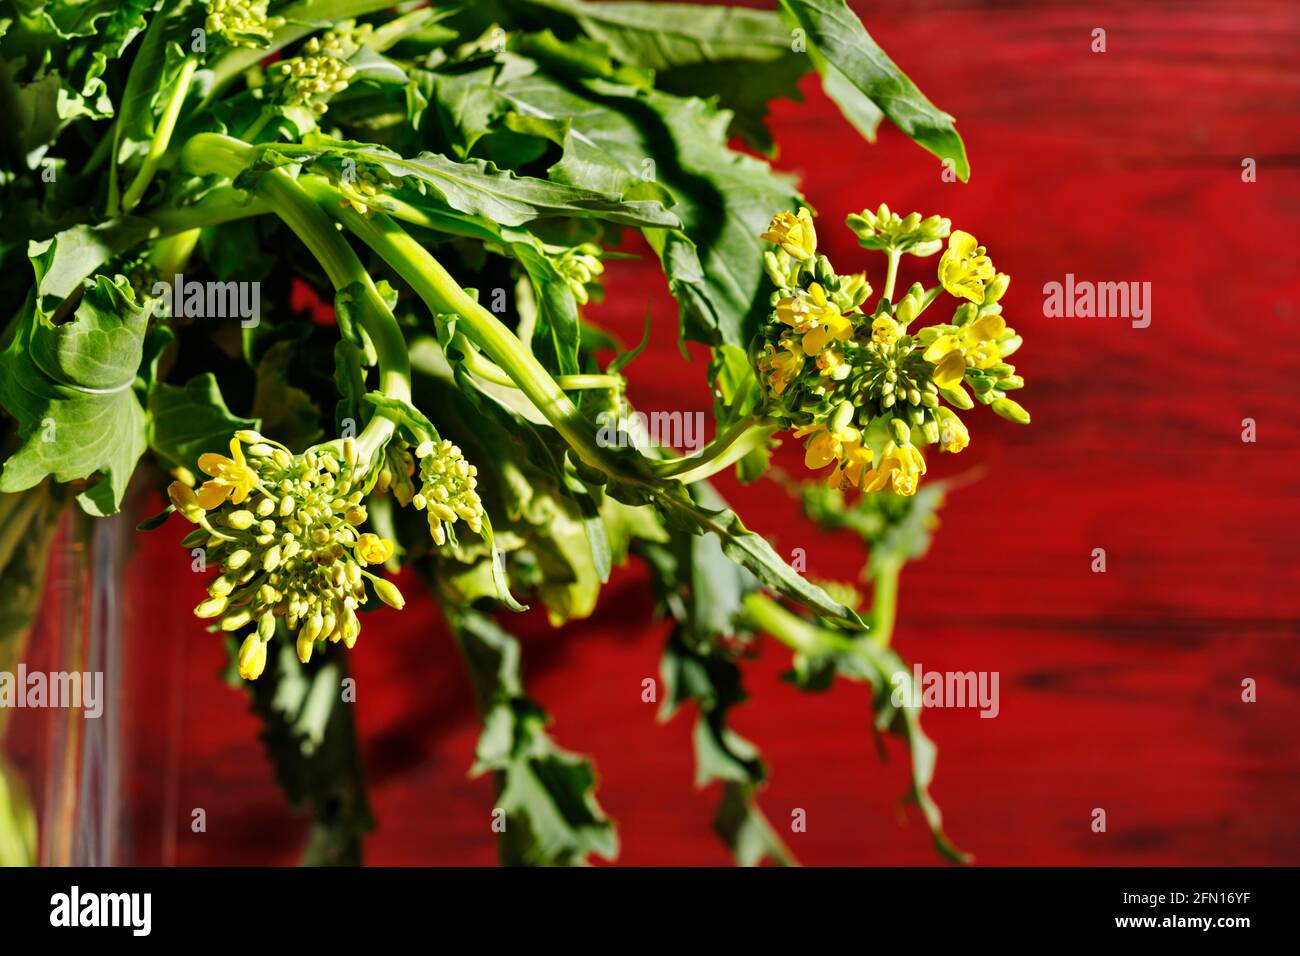 Bunch of turnip greens -brassica rapa - with yellow flowers in bowl , root vegetable with bitter taste Stock Photo